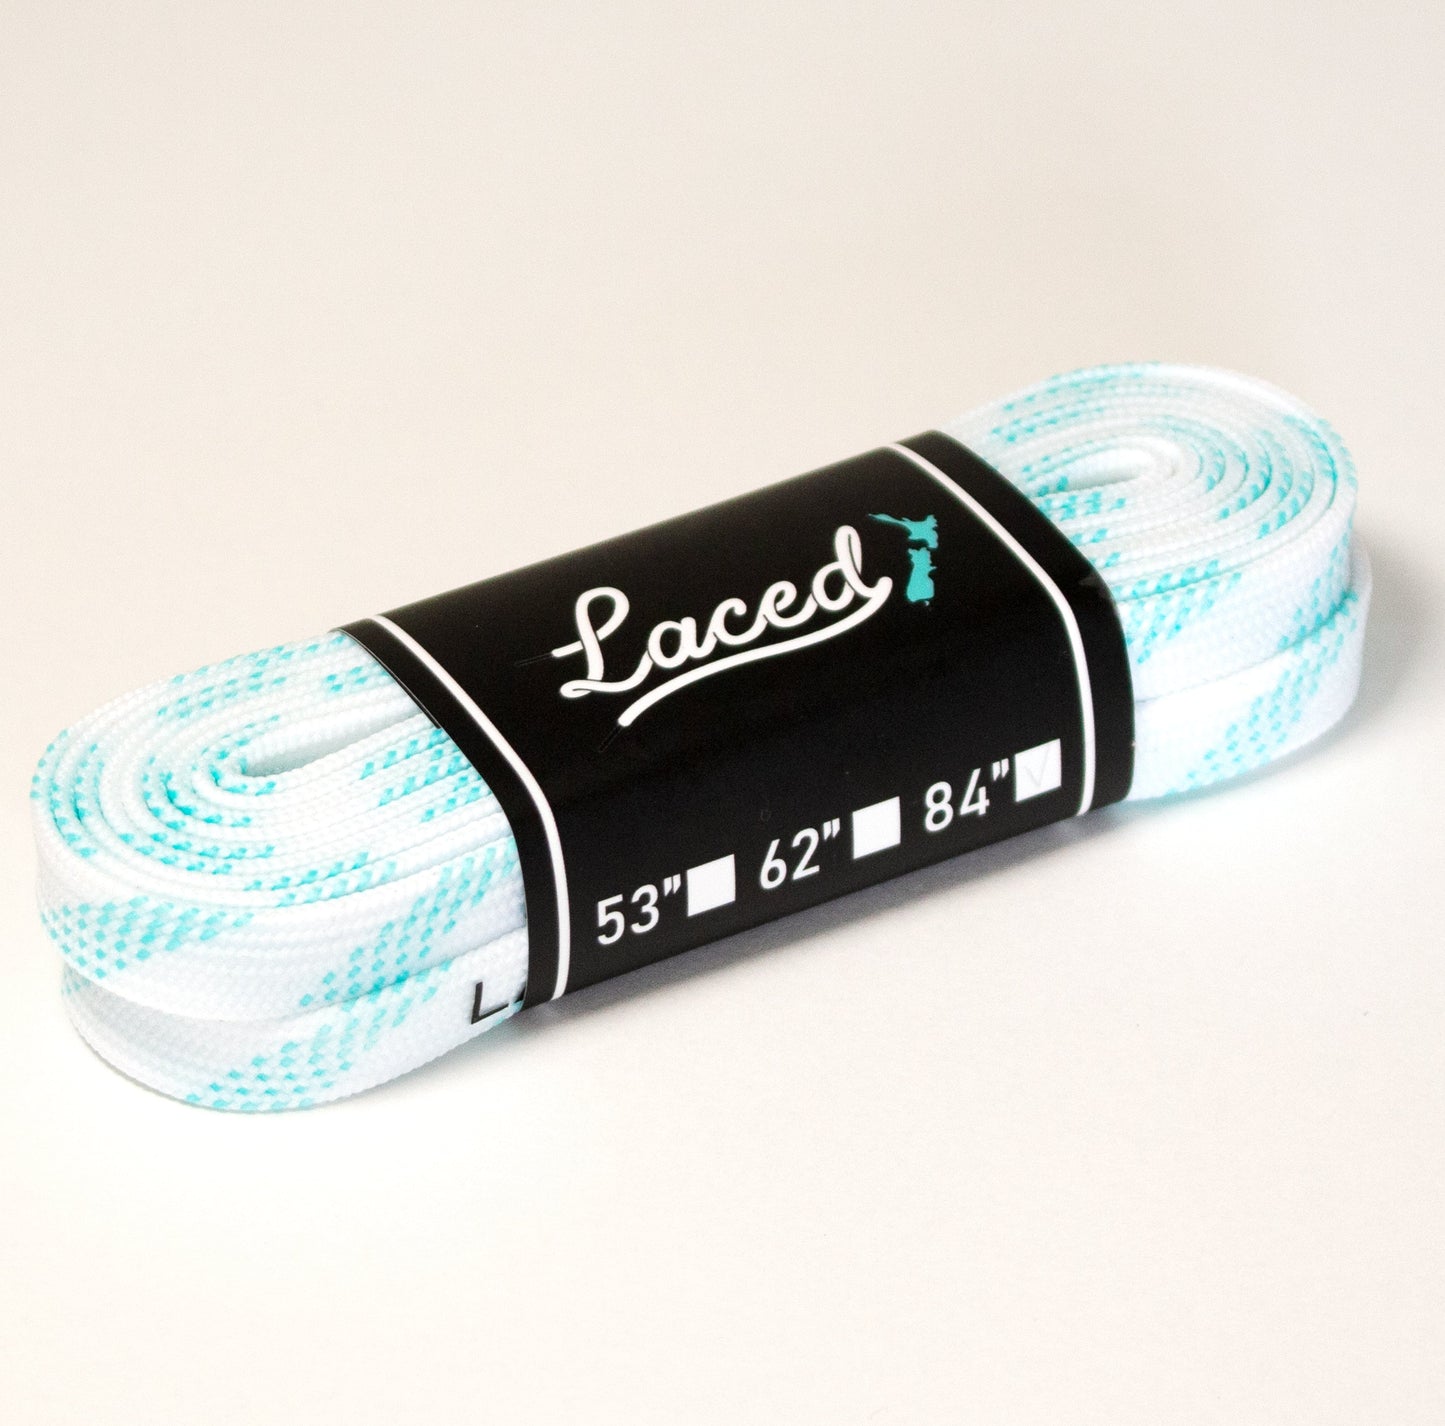 Laced Waxed Laces - White & Mint